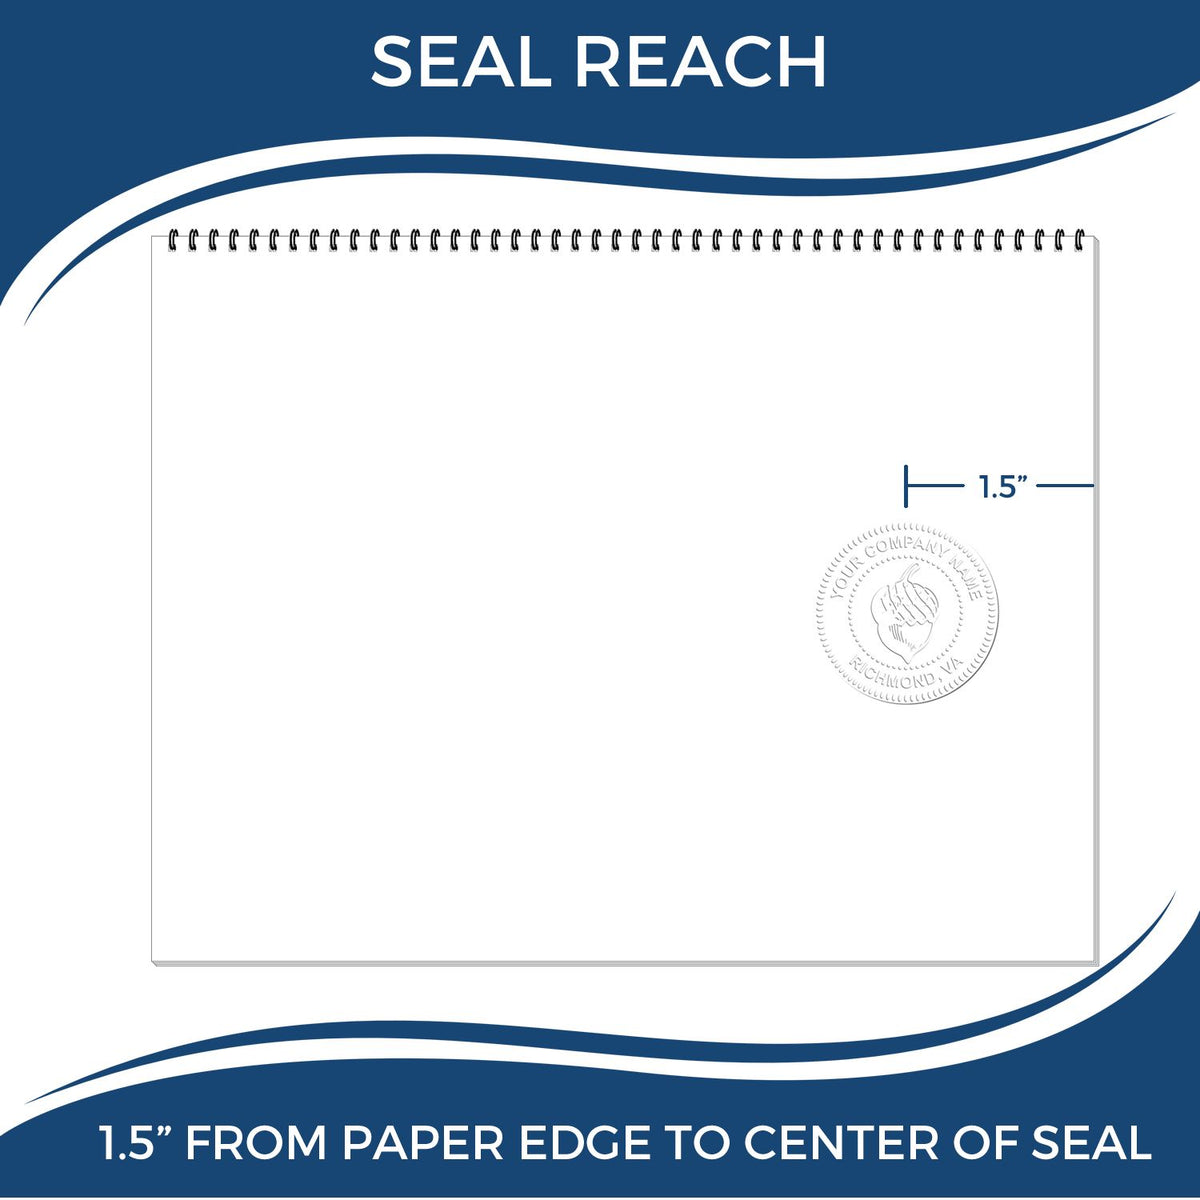 An infographic showing the seal reach which is represented by a ruler and a miniature seal image of the Gift New Jersey Geologist Seal